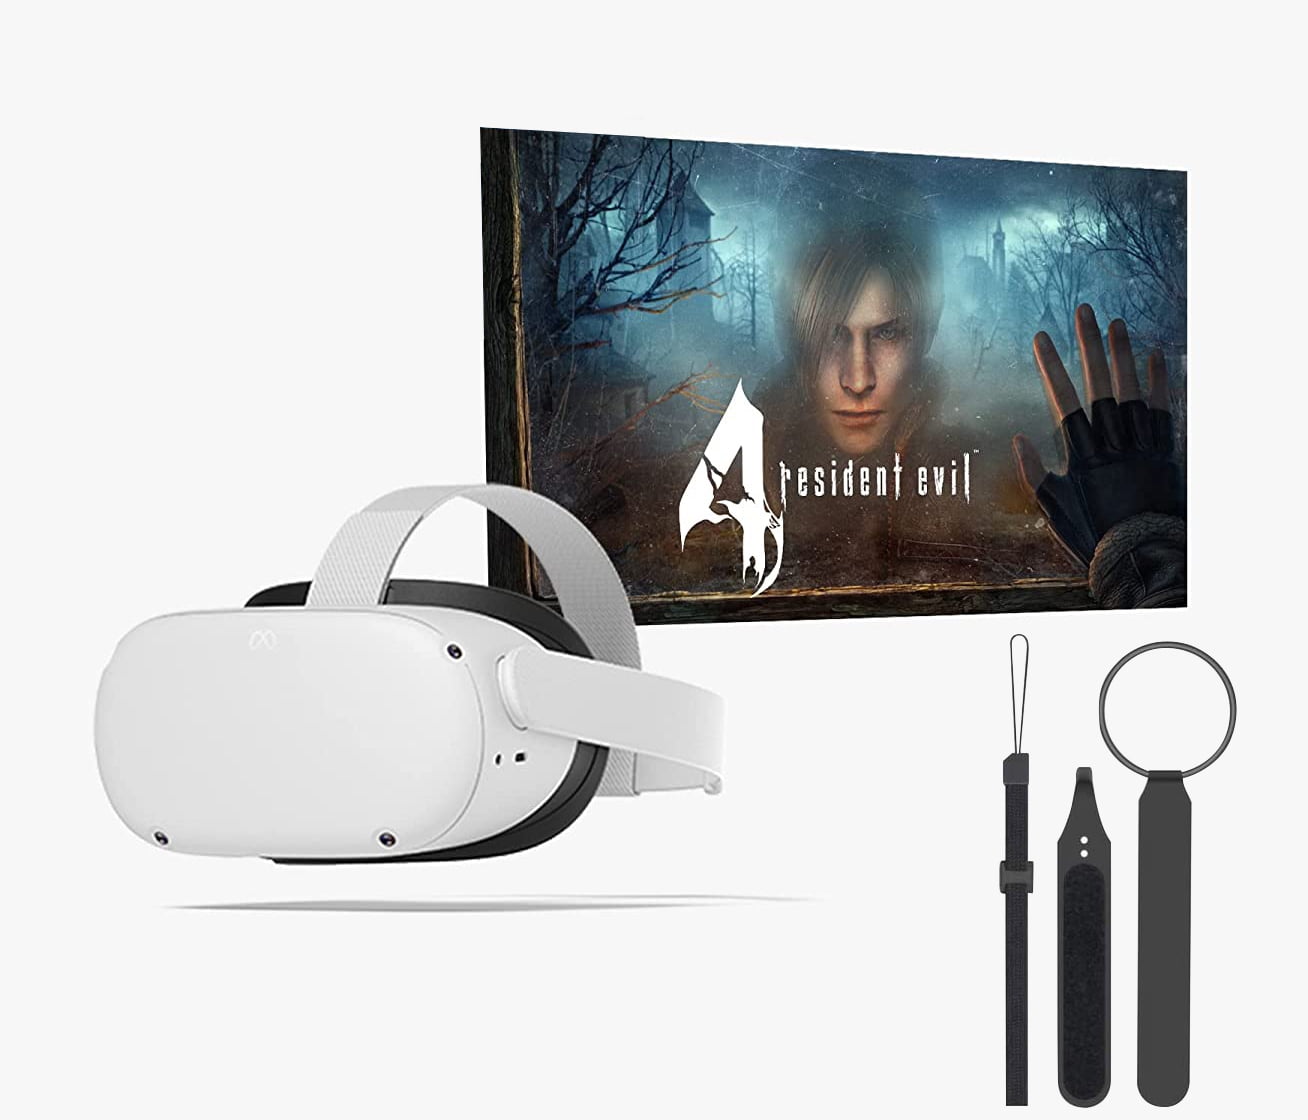 PC/タブレット PC周辺機器 Meta Quest 2(Oculus)-Advanced All-In-One Virtual Reality Headset — 128 GB  with Resident Evil 4 + Mazepoly Knuckle Straps